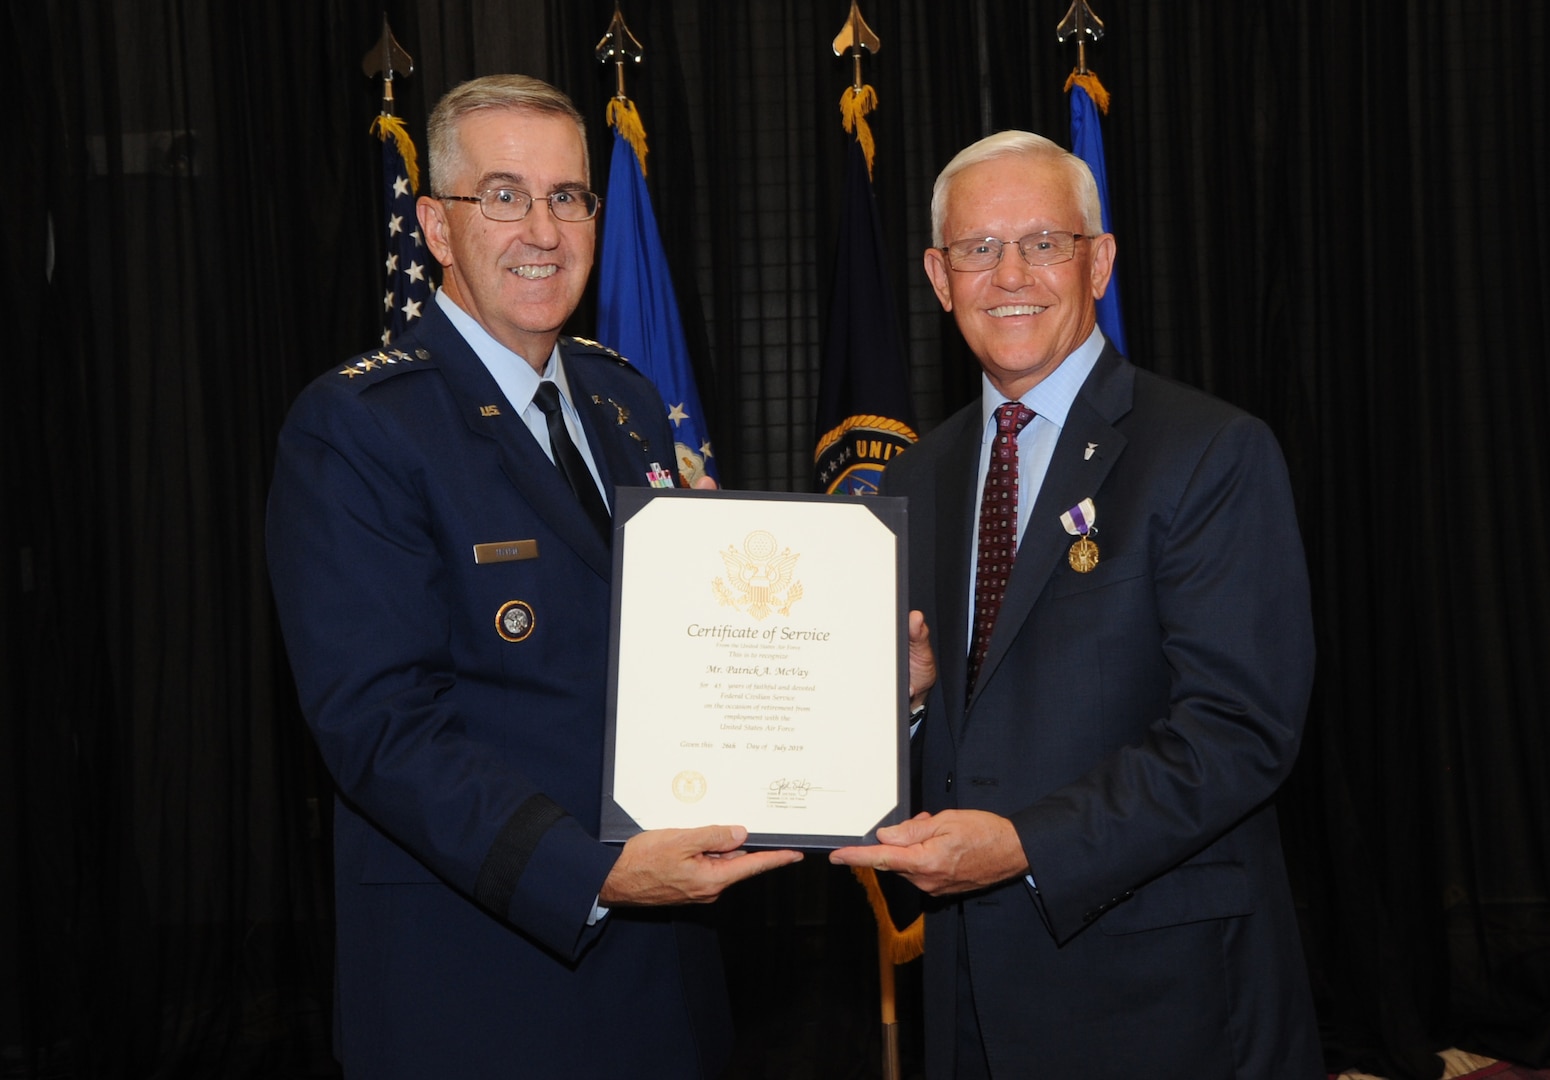 U.S. Air Force Gen. John Hyten, commander of U.S. Strategic Command, presents a certificate of service to Pat McVay, director of joint exercises, training and assessments, and a Senior Executive Service member, during his retirement ceremony in Bellevue, Neb., July 26, 2019.